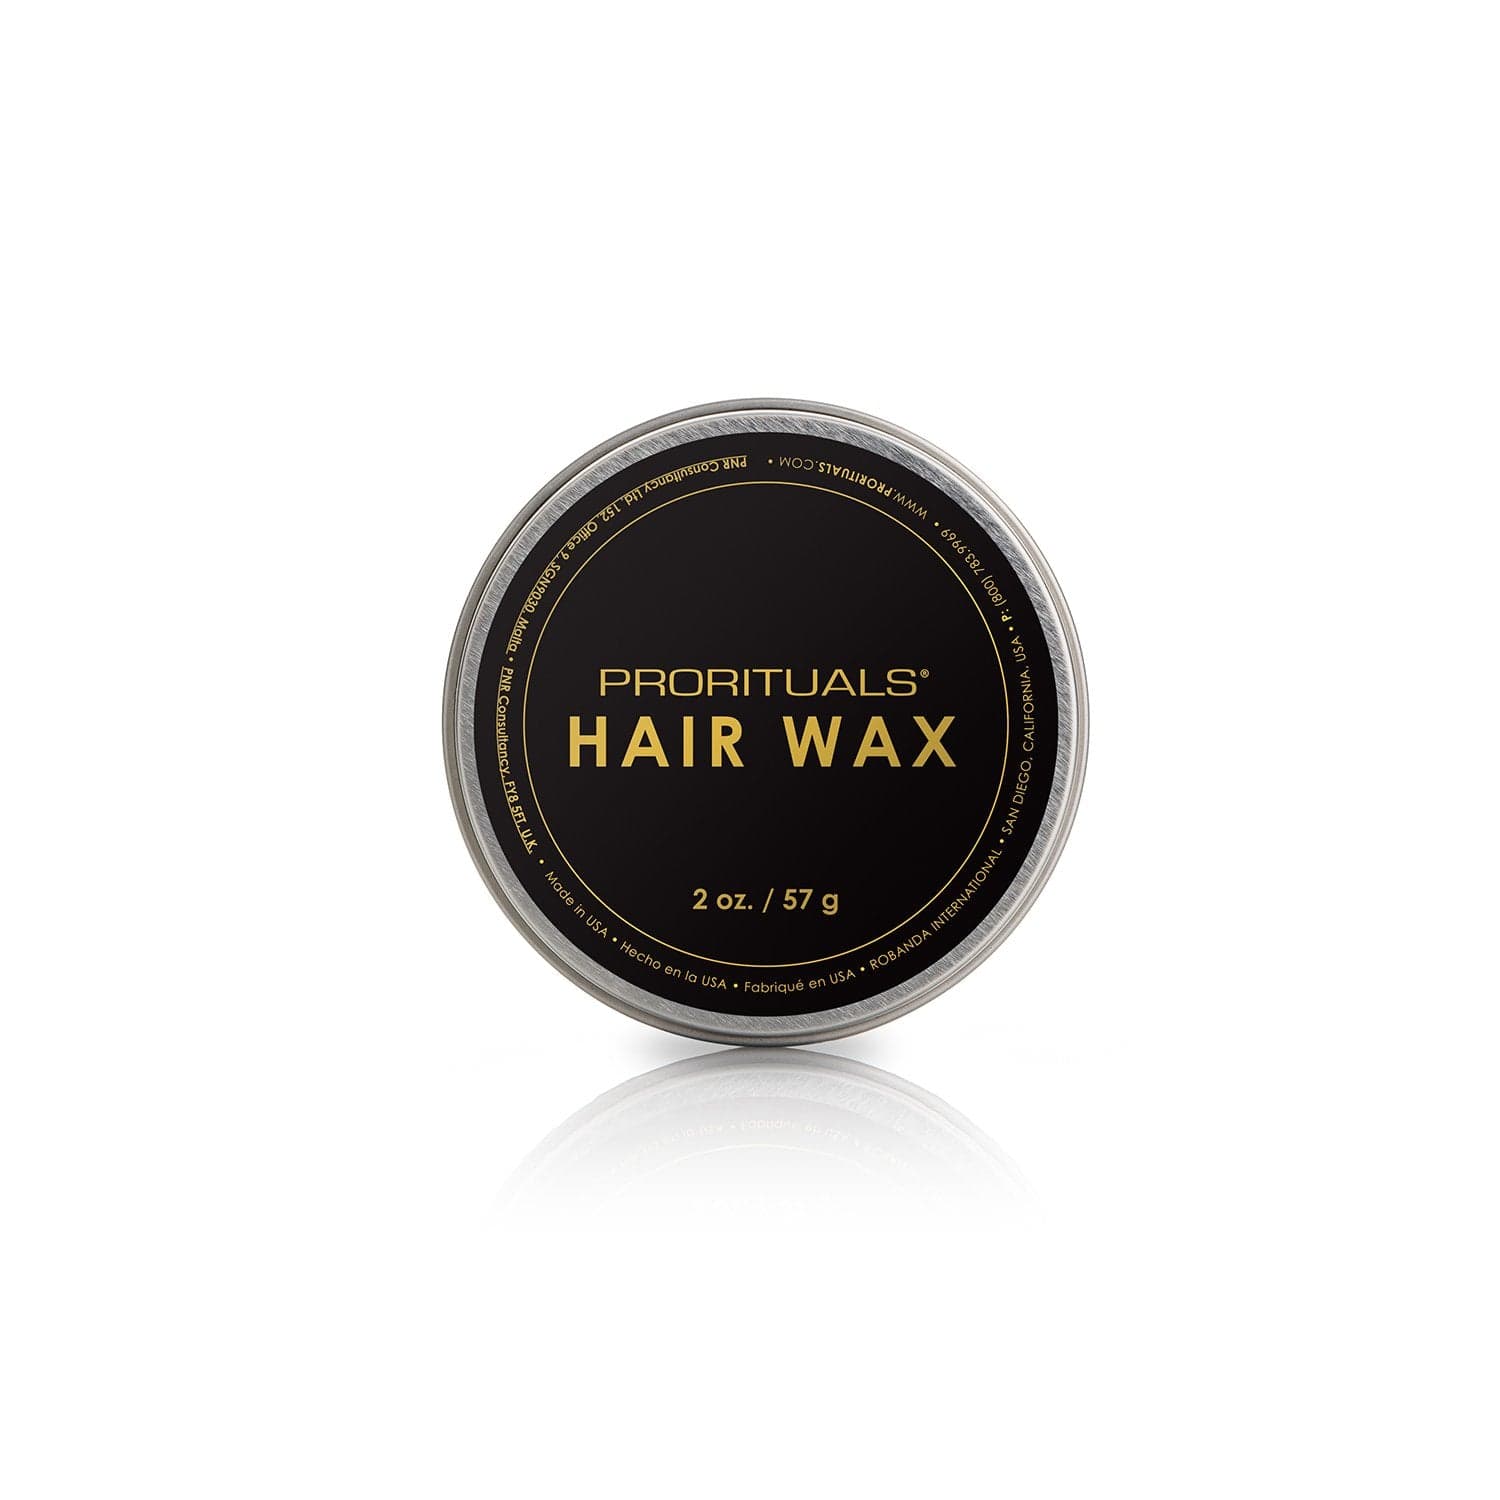 Prorituals Hair Wax SULFATE FREE   FIRM HOLD, MATTE FINISH